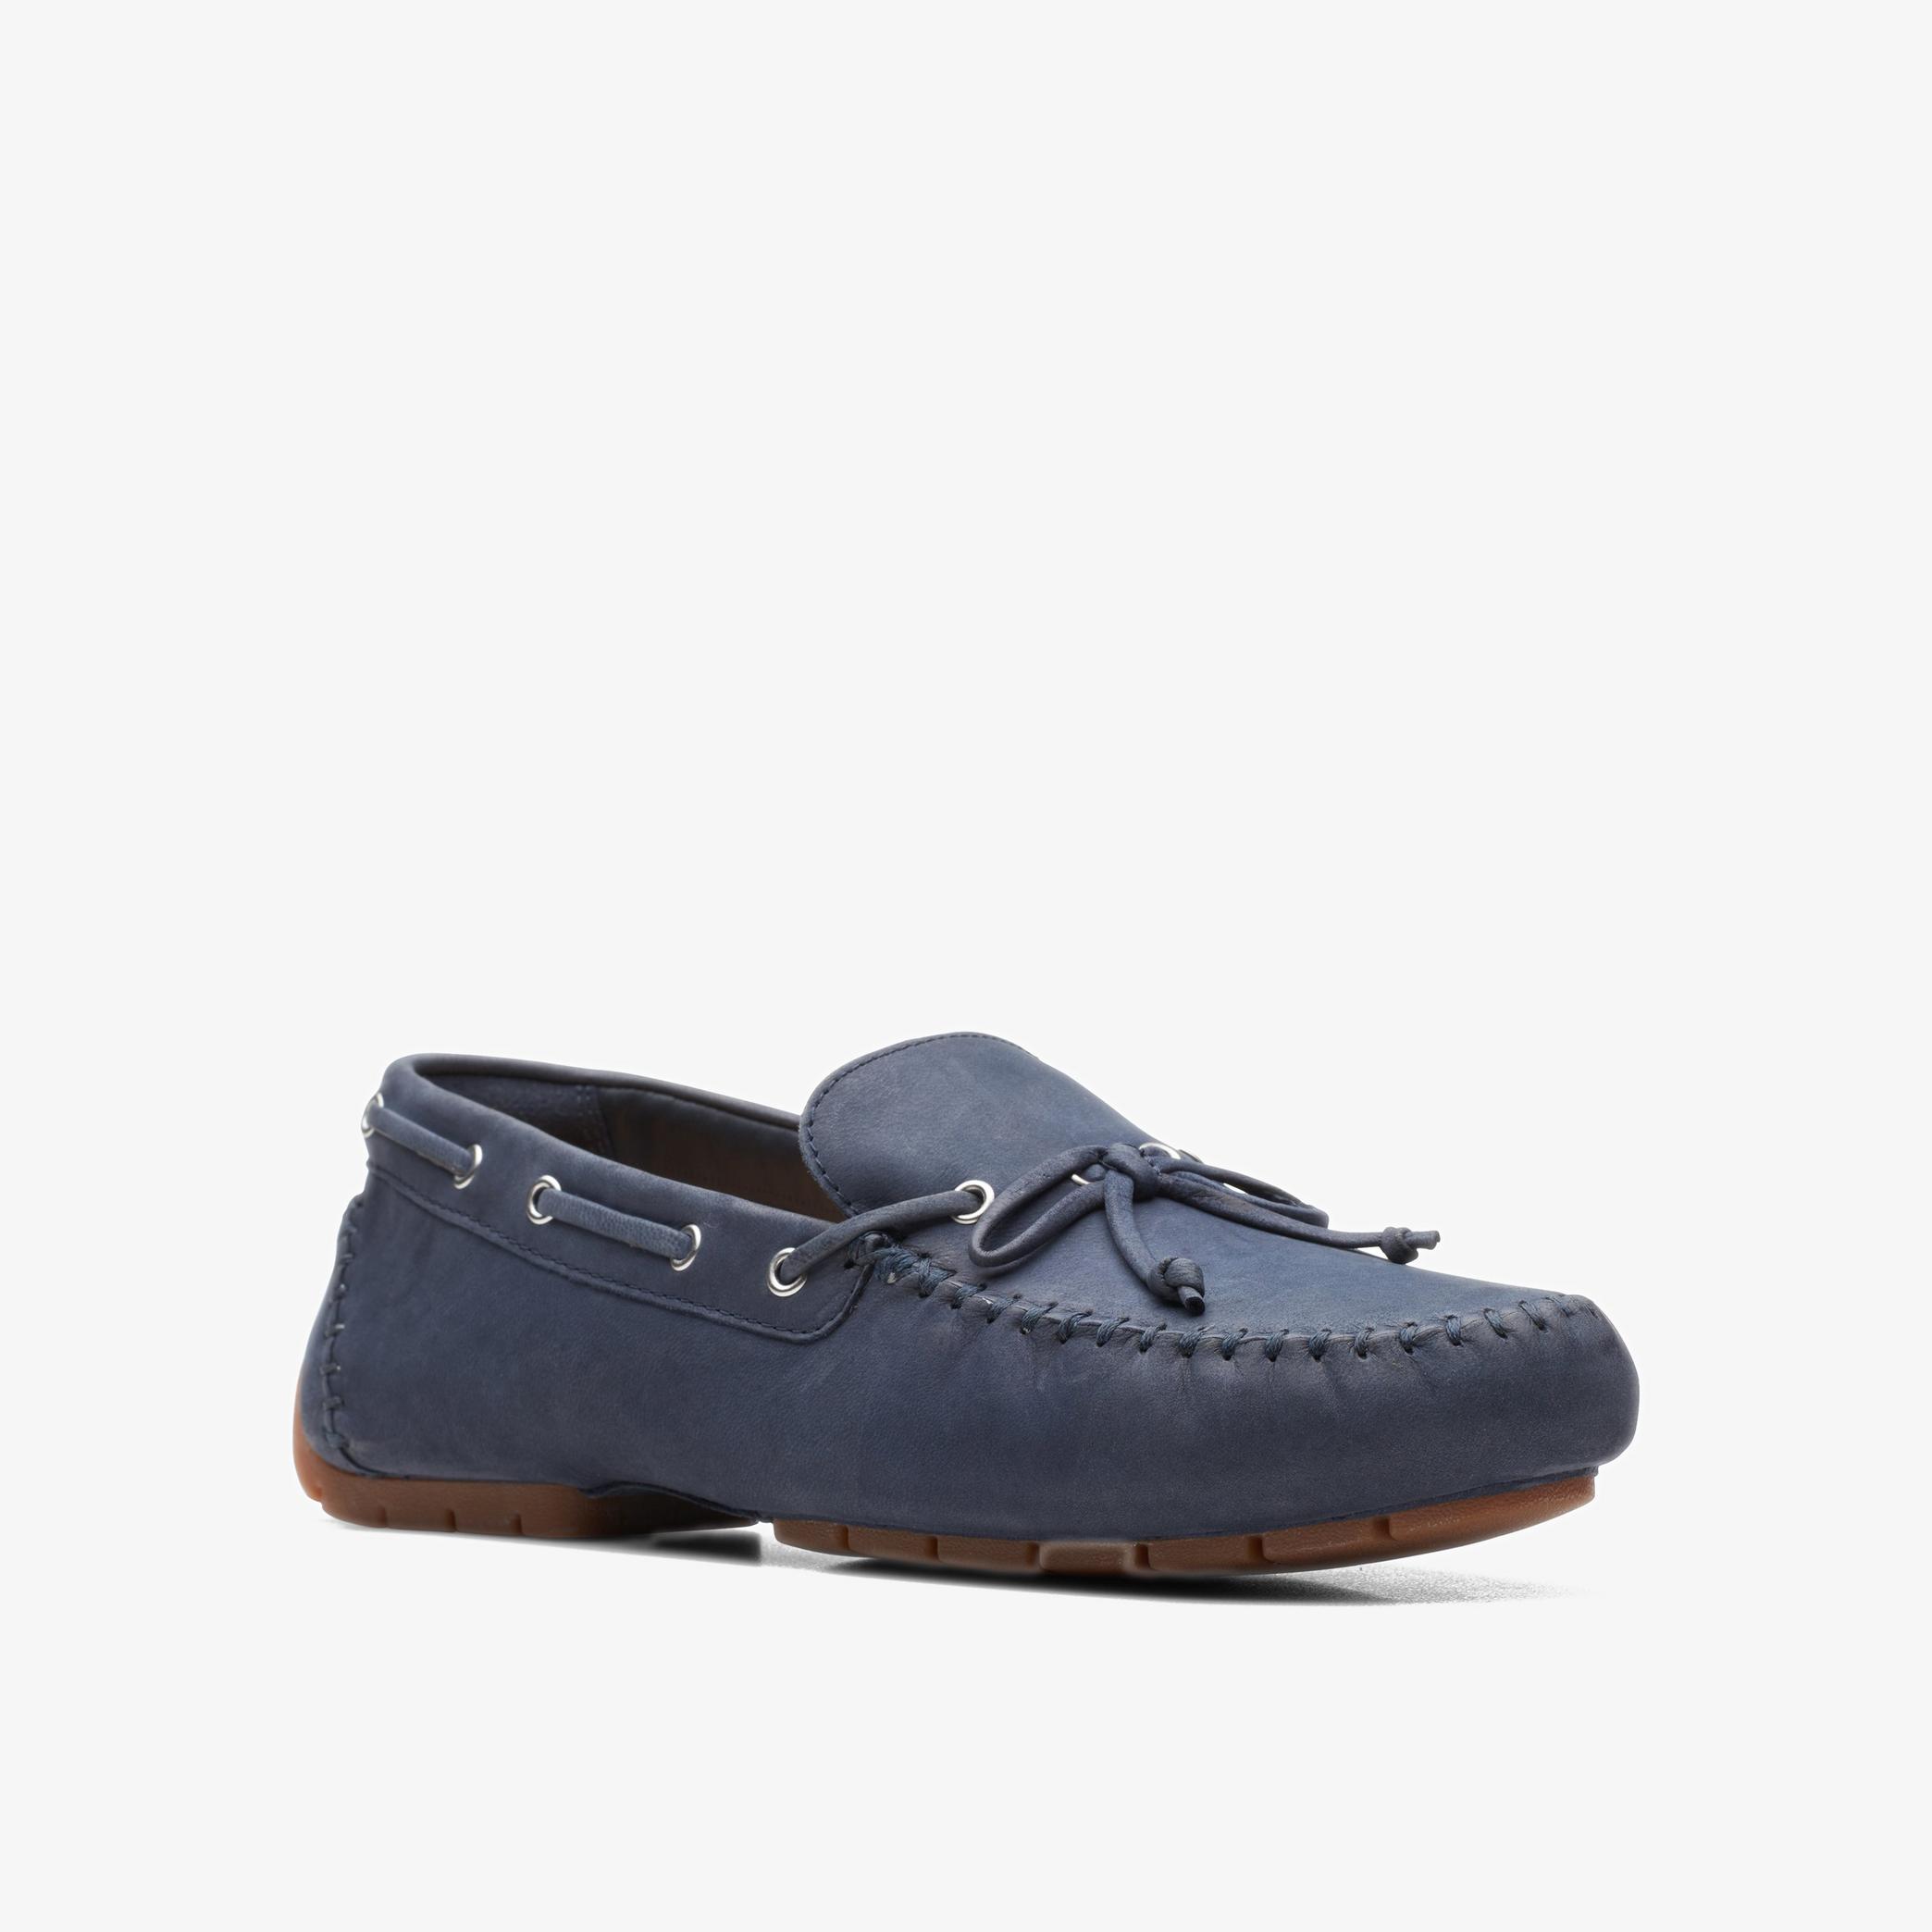 C Mocc Tie Navy Nubuck Loafers, view 3 of 6